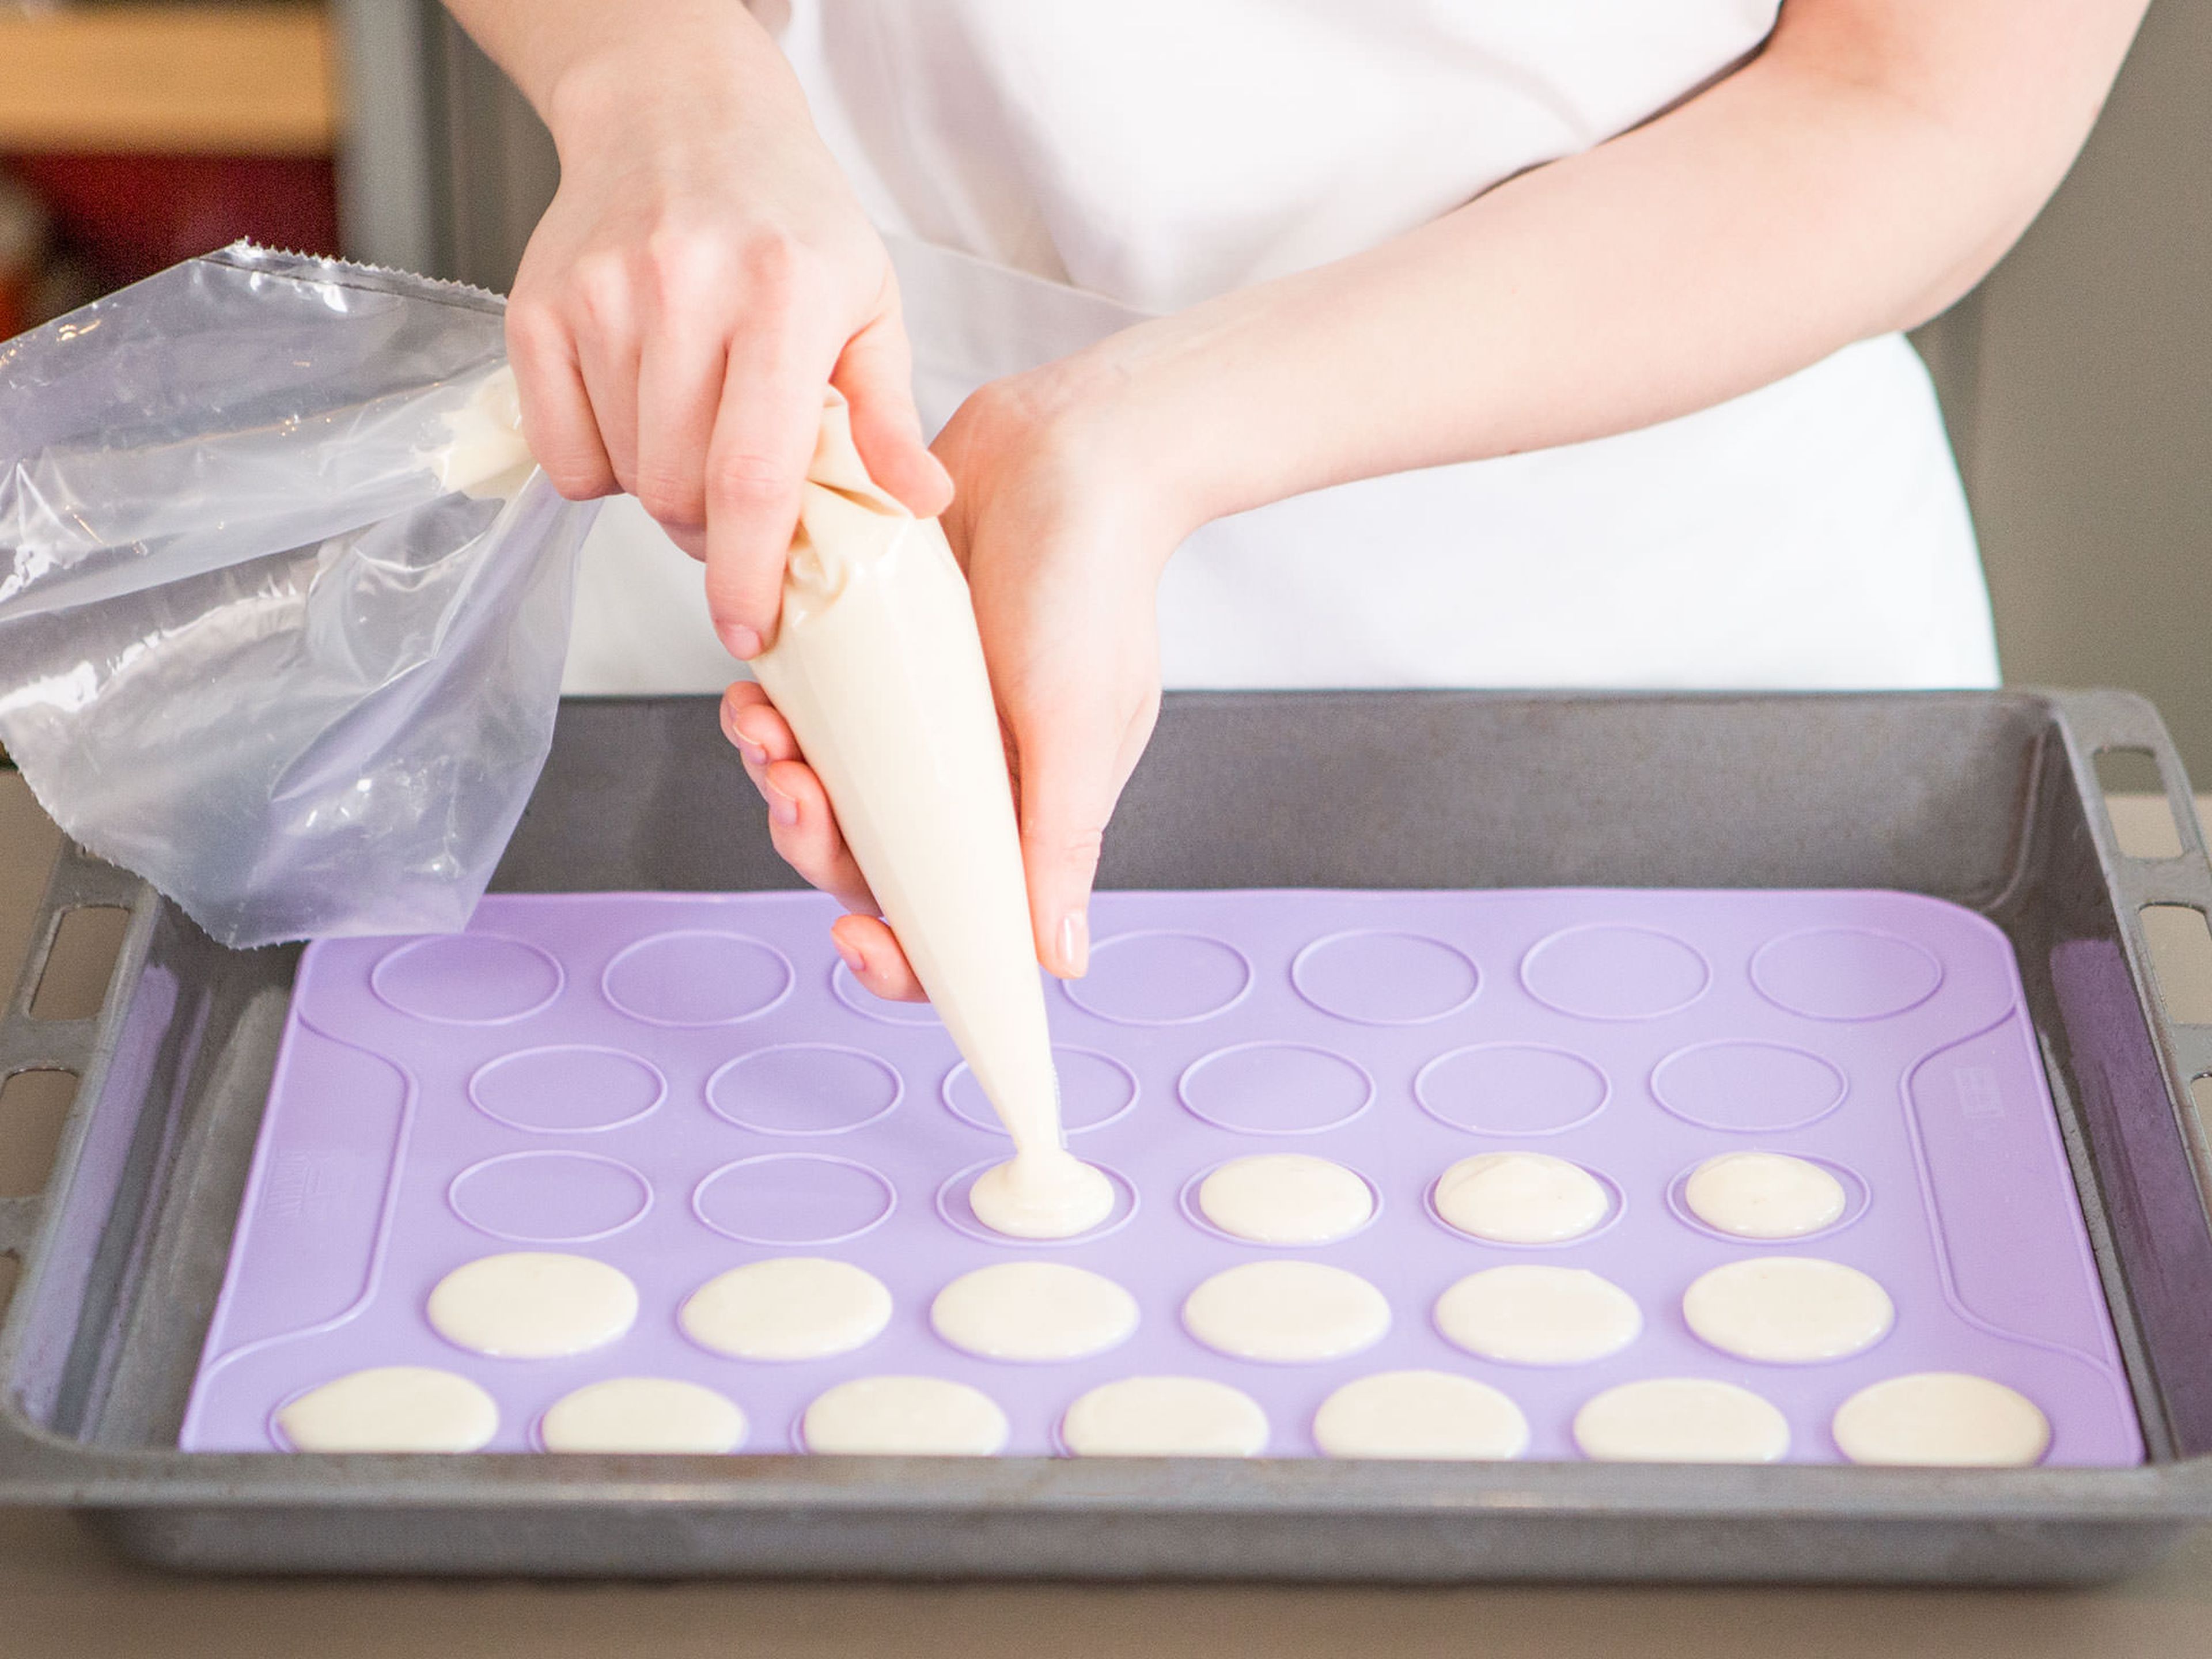 Fill a piping bag with macaron mixture. Pipe onto a baking sheet lined with a macaron baking mat. Tap hard onto kitchen counter to release any air bubbles. Let stand at room temperature for approx. 30 – 40 min. Then, bake in preheated oven at 140°C/285°F for approx. 12 – 15 min.